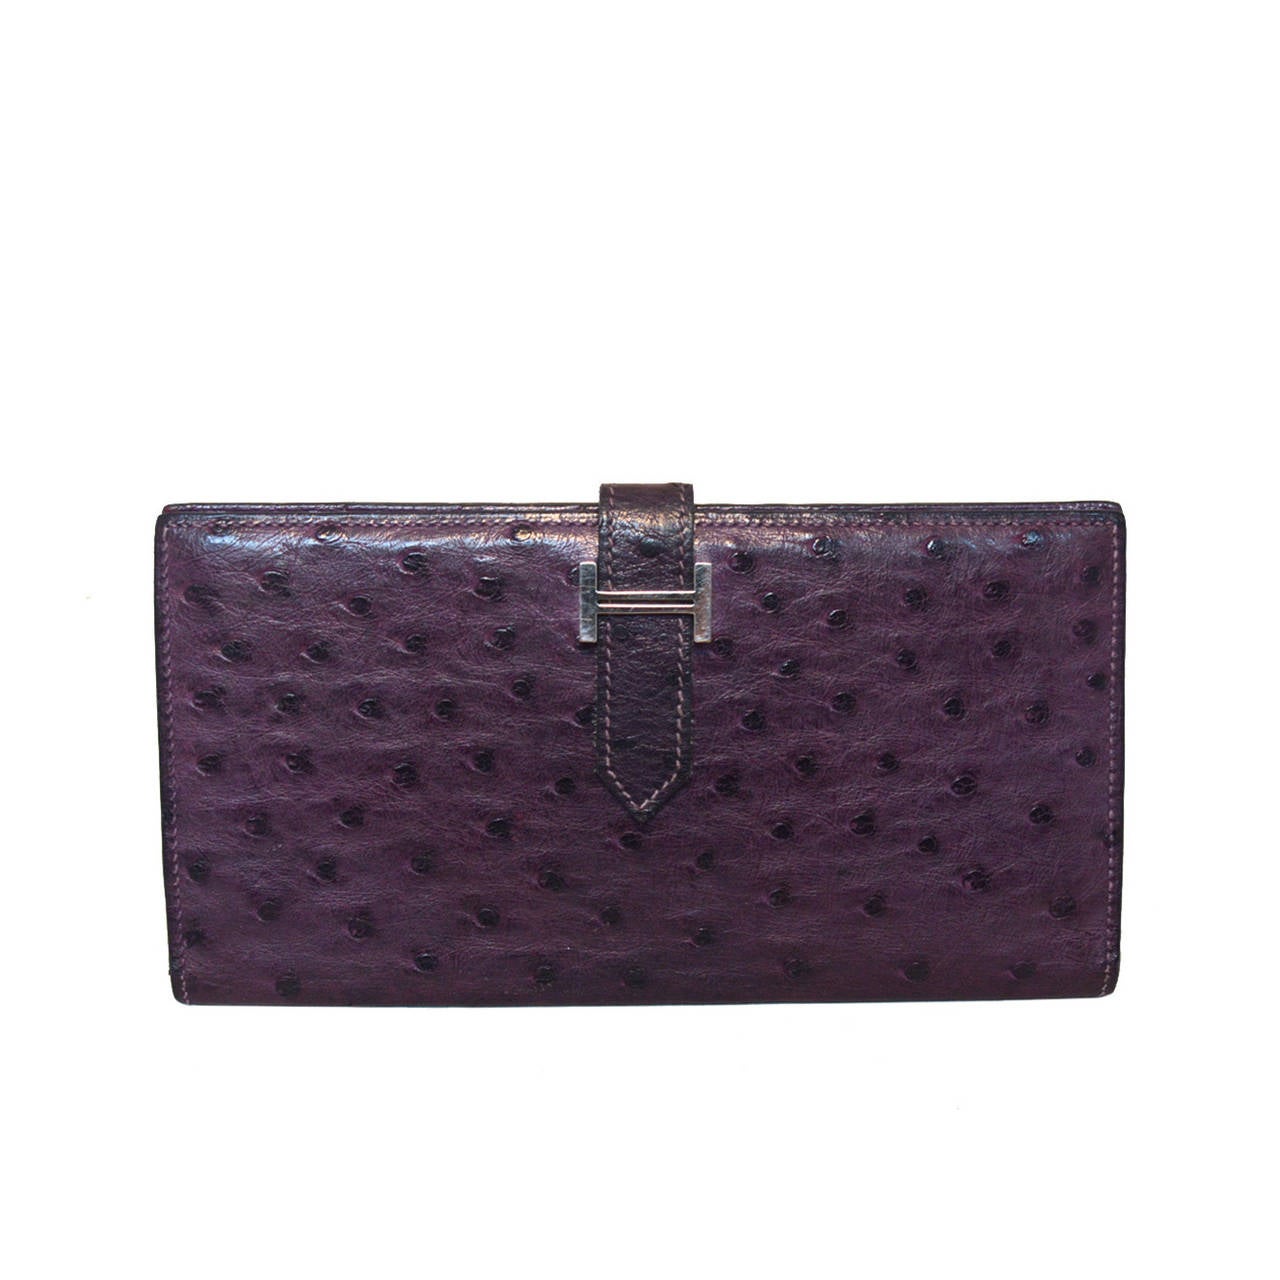 Hermes RARE Purple Ostrich Leather Wallet